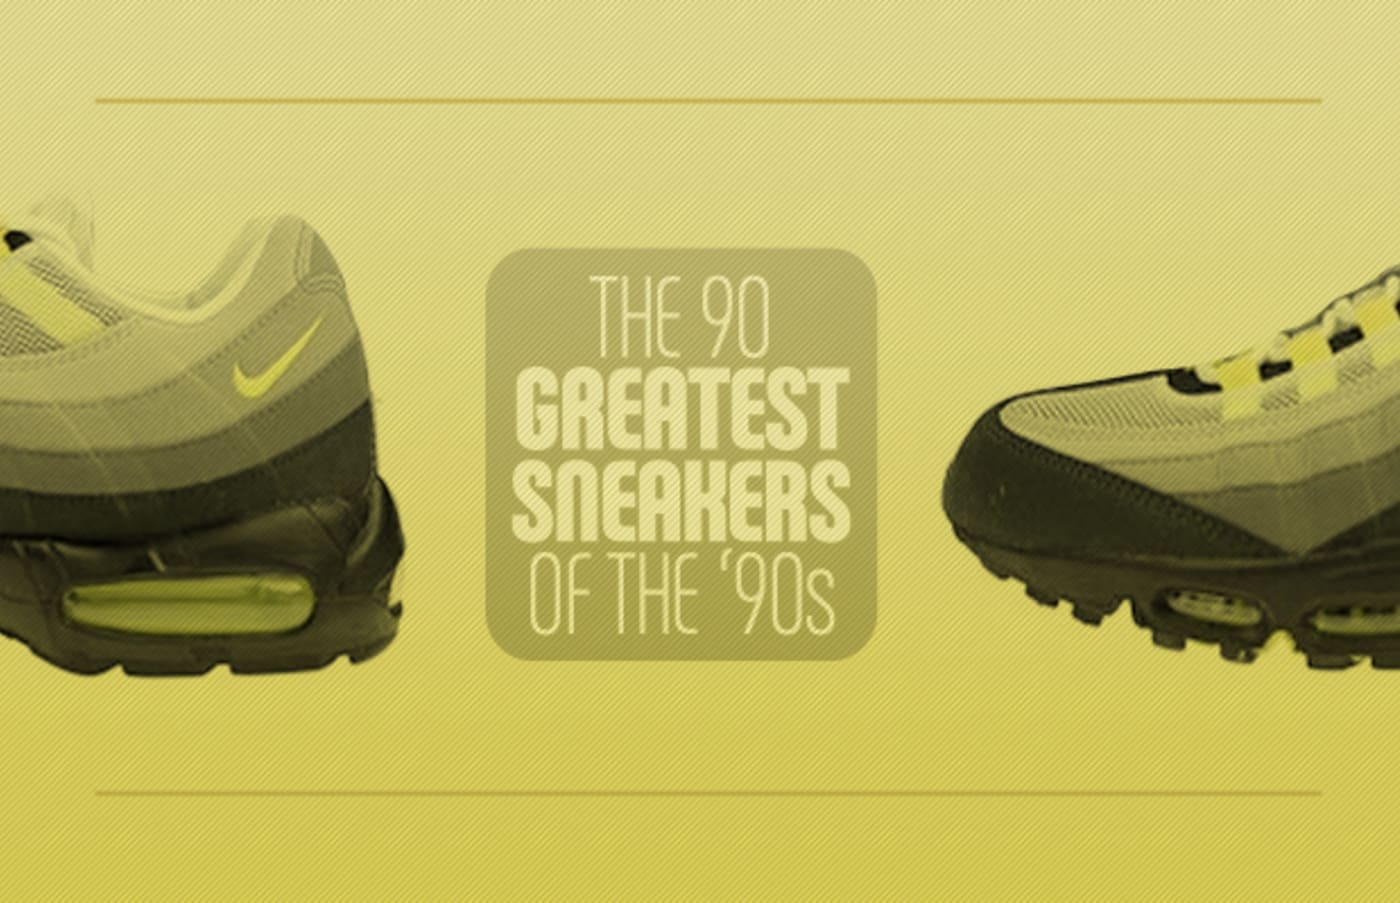 A Definitive Guide for 90 Greatest Sneakers of the '90s | Complex